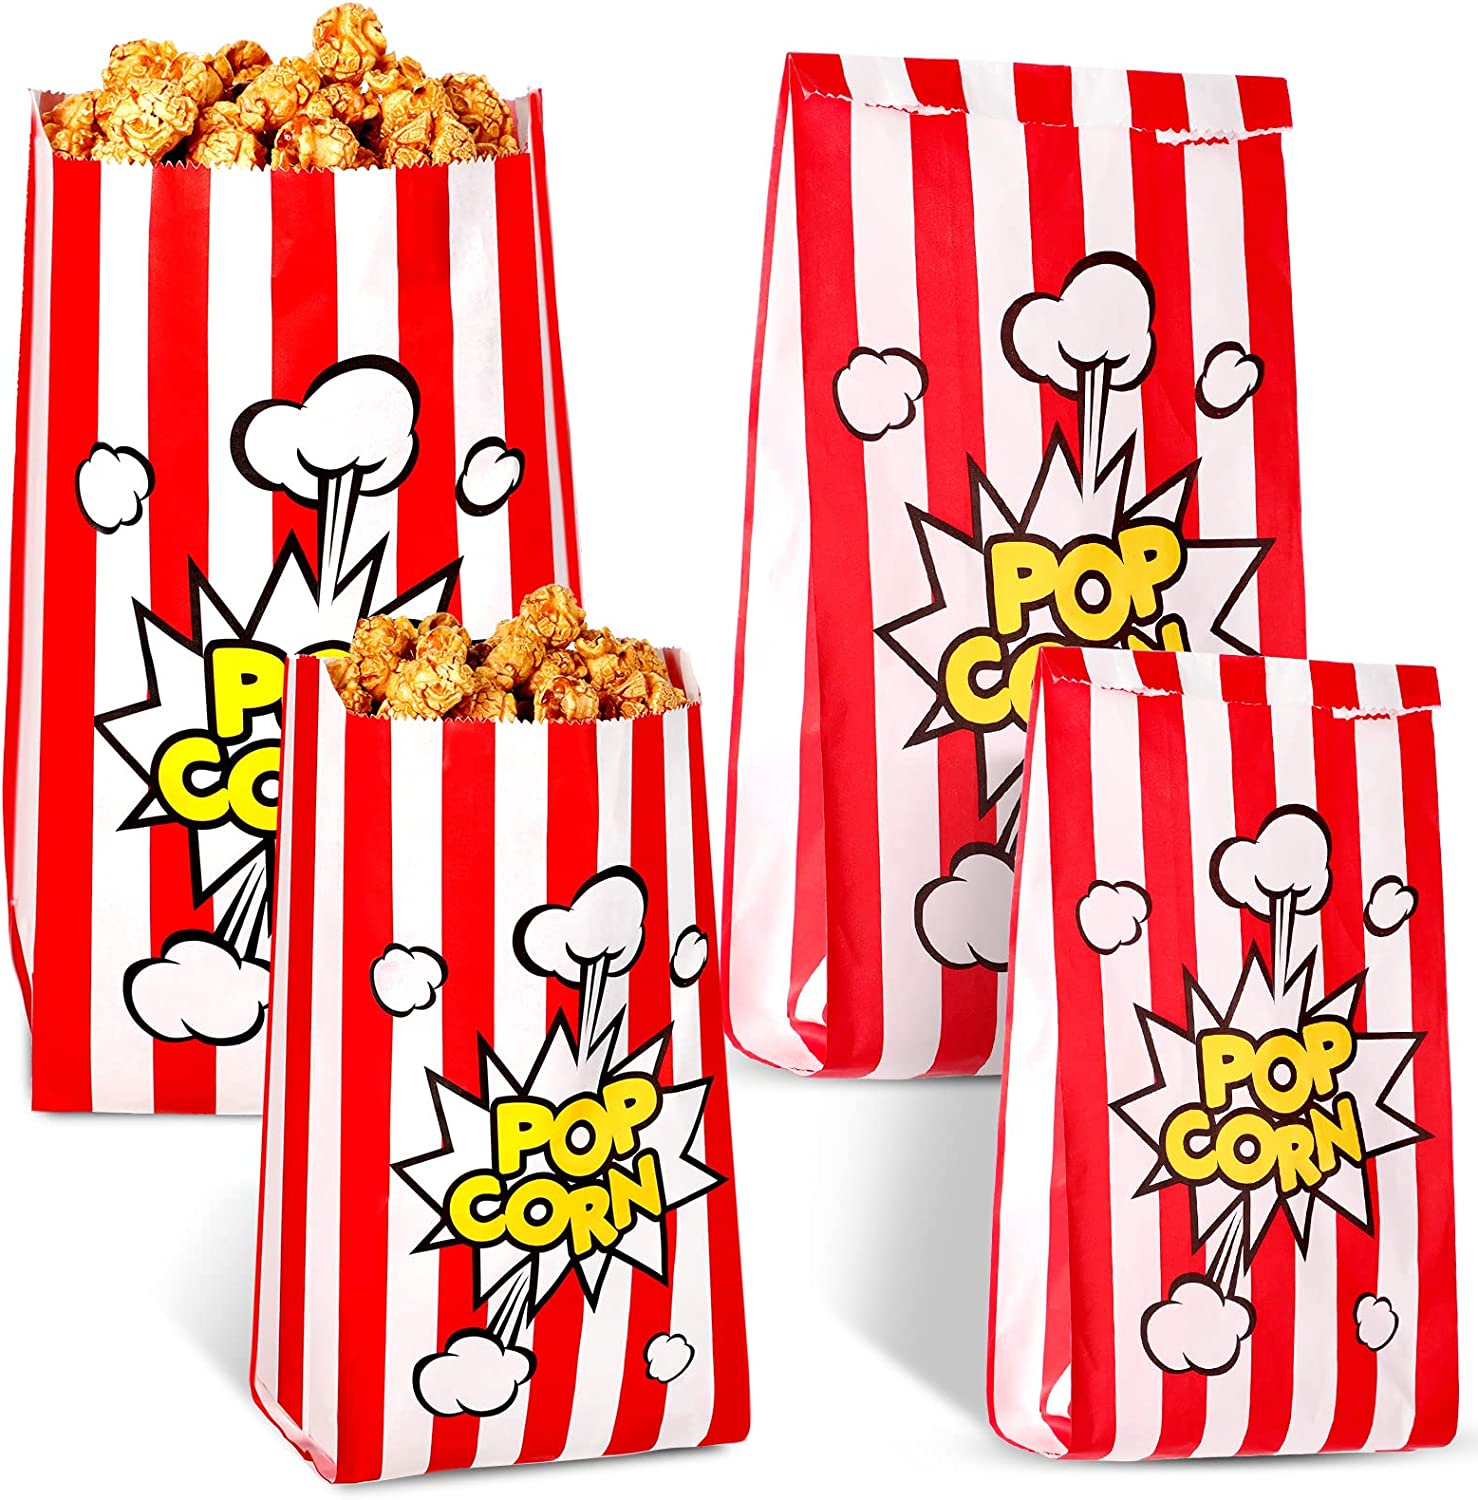 Tallew 120 Pieces Paper Popcorn Bags Individual Servings 1 oz, 2 oz, for Movie Carnival Birthday Game Theme Party Supplies Small Medium Size Popcorn Container Bags for Popcorn Machine White